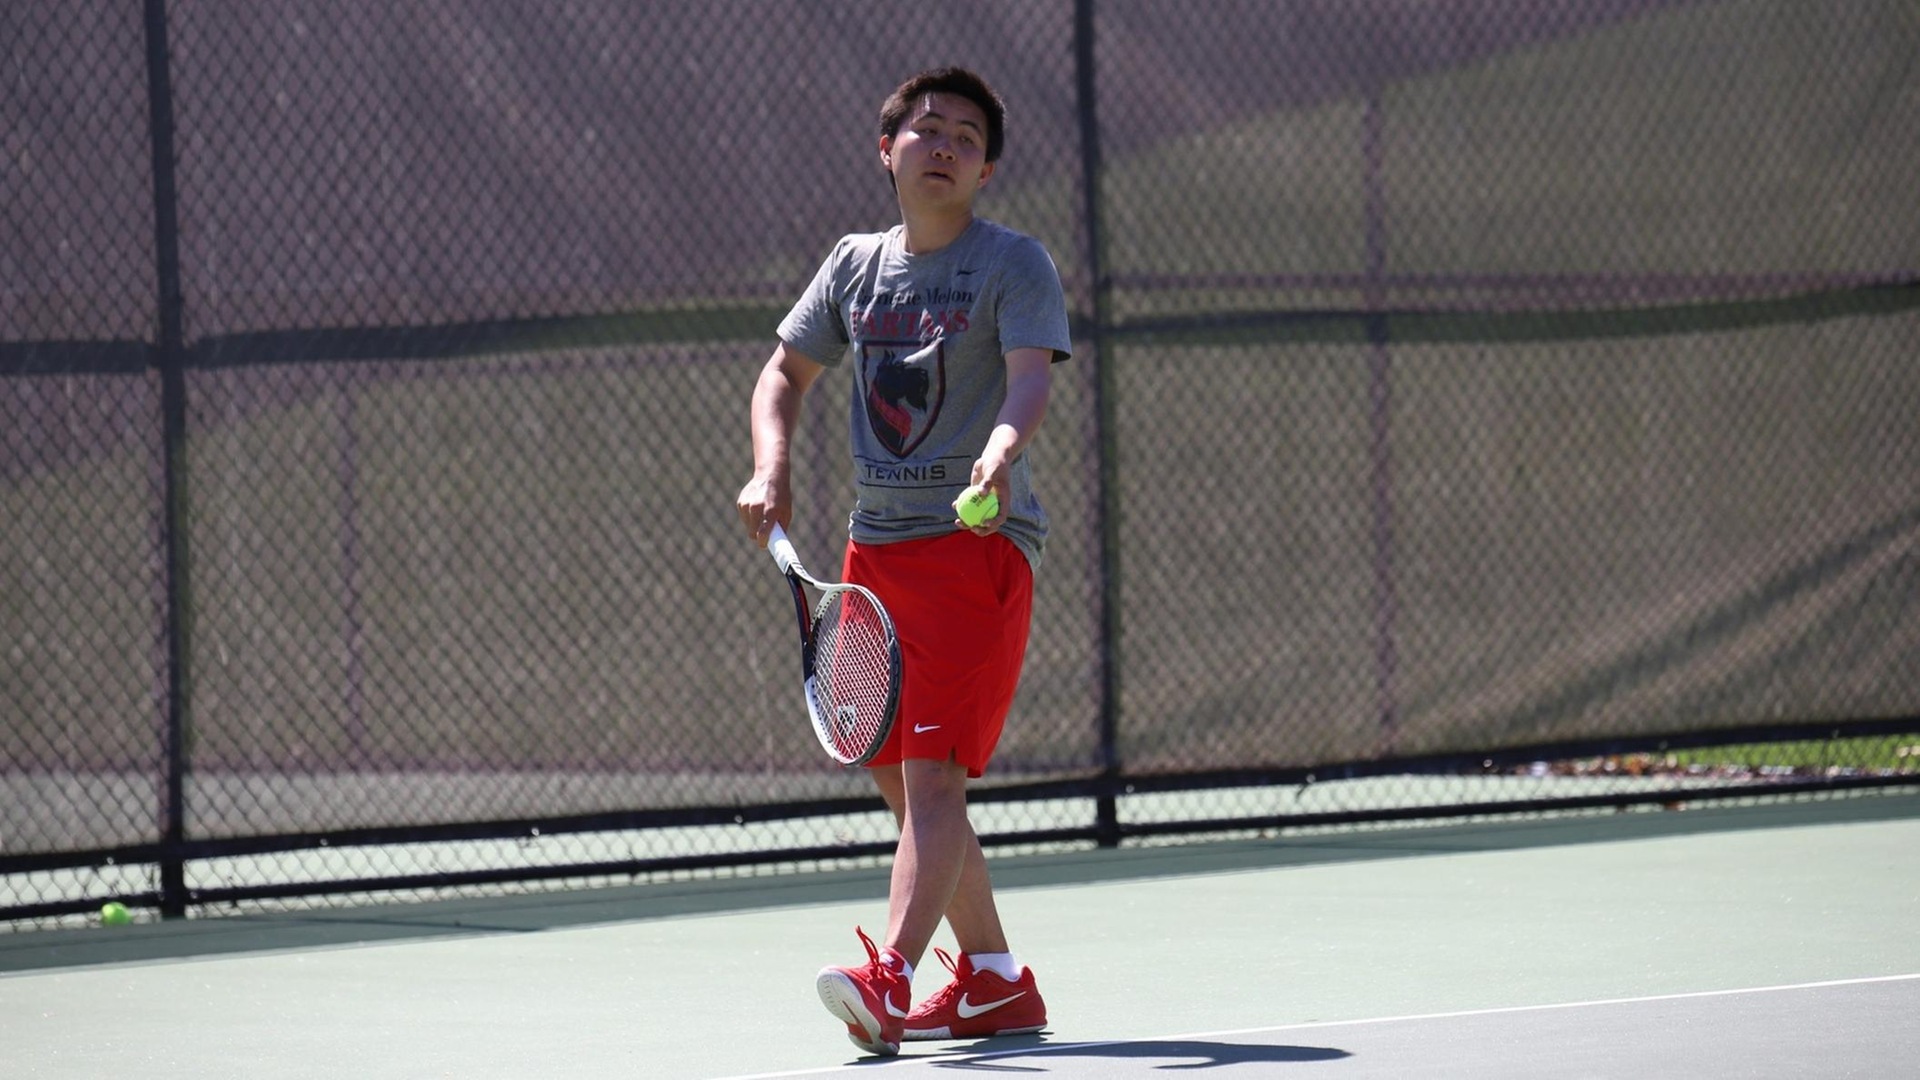 men's tennis player wearing gray shirt and red shorts about to serve